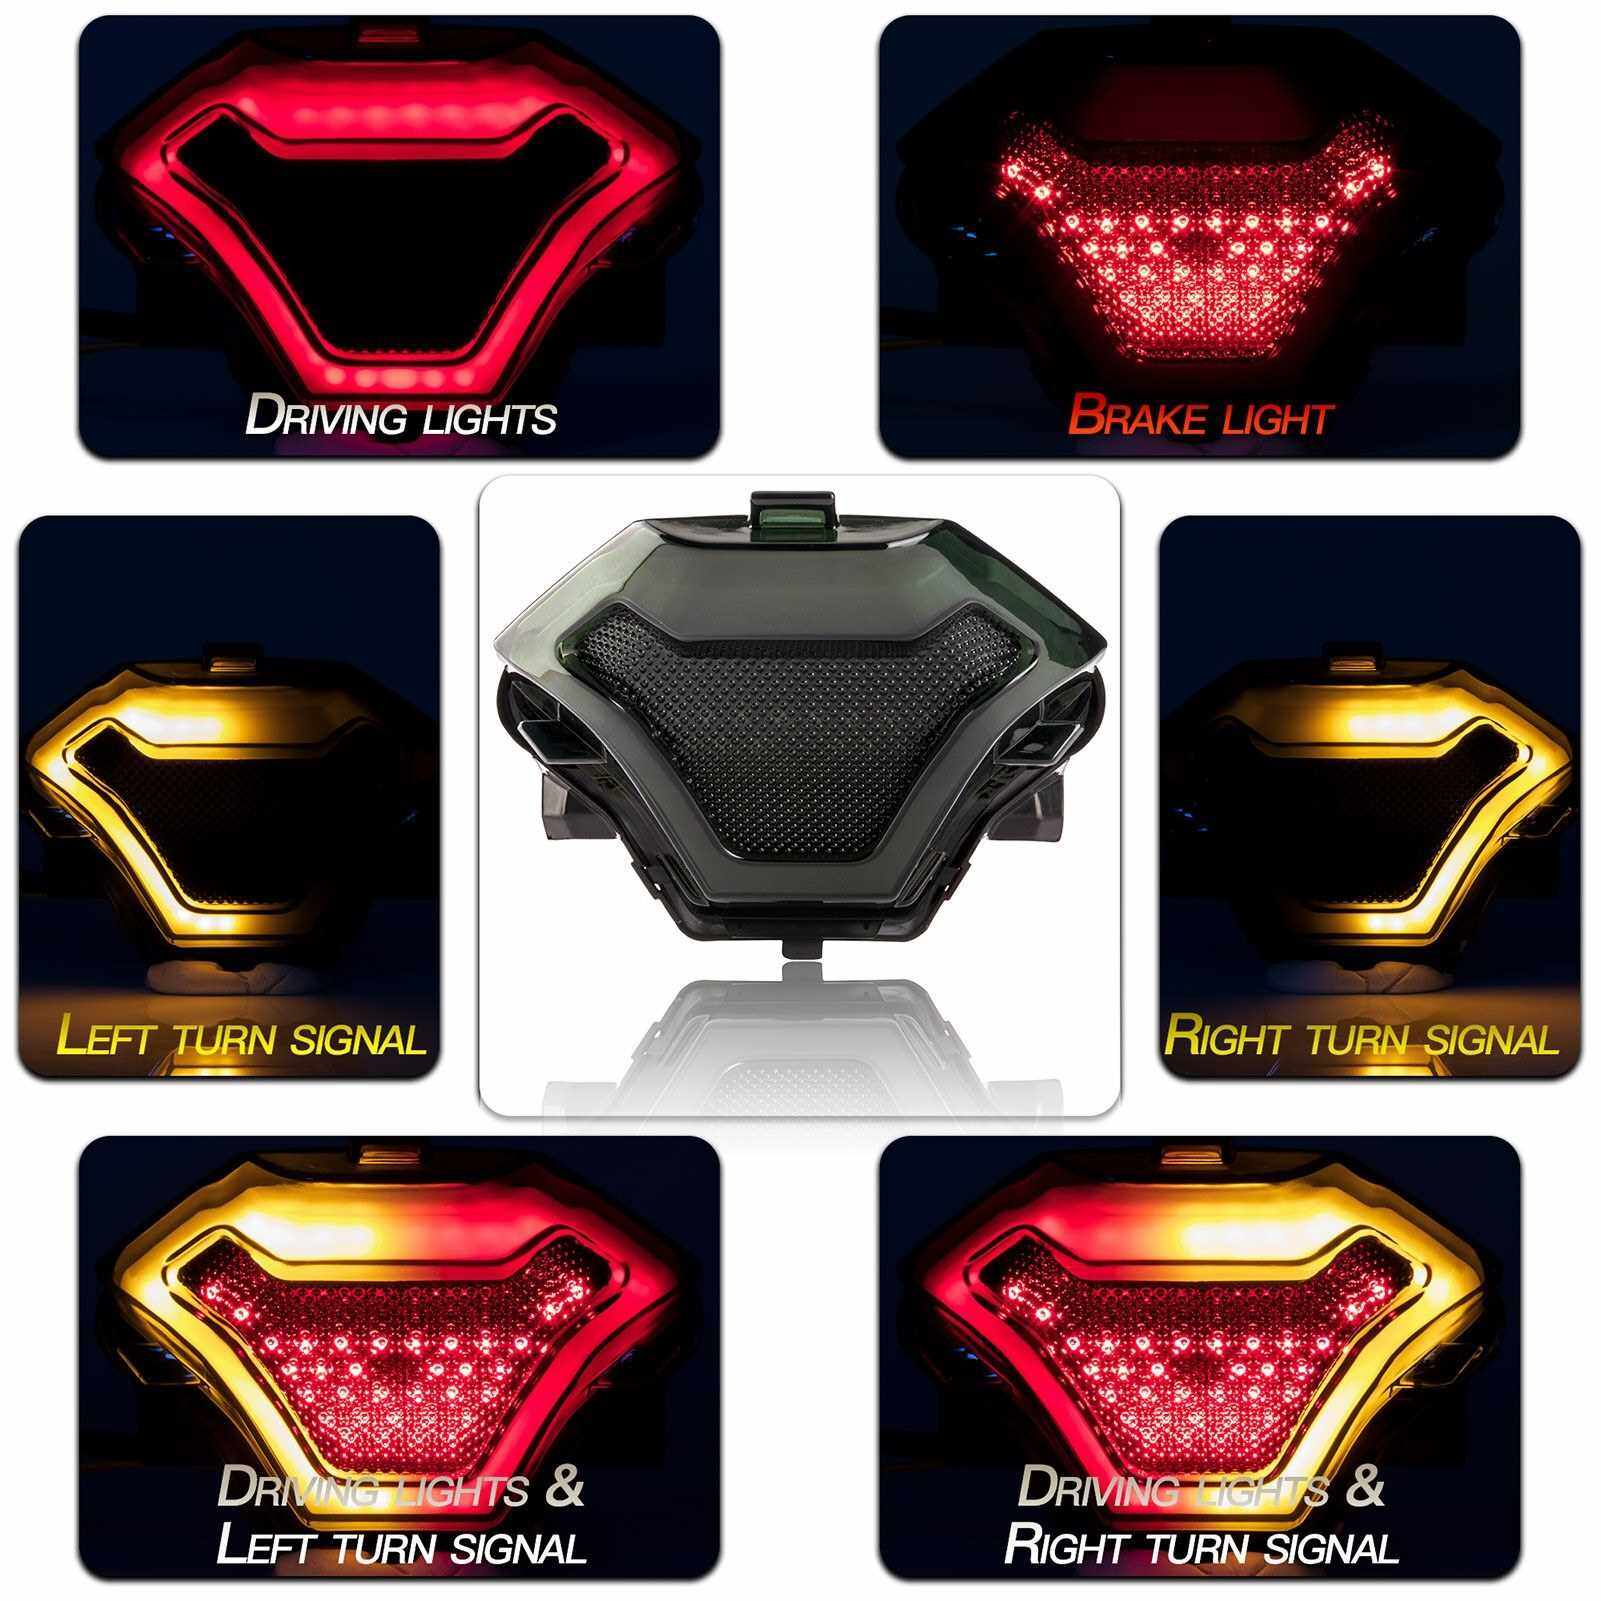 Best Selling Motorcycle Brake Light Tail Lamp with LED Turn Signals Replacement for Yamaha YZF R3 R25 Y15ZR MT07 FZ07 LC150 (Red)